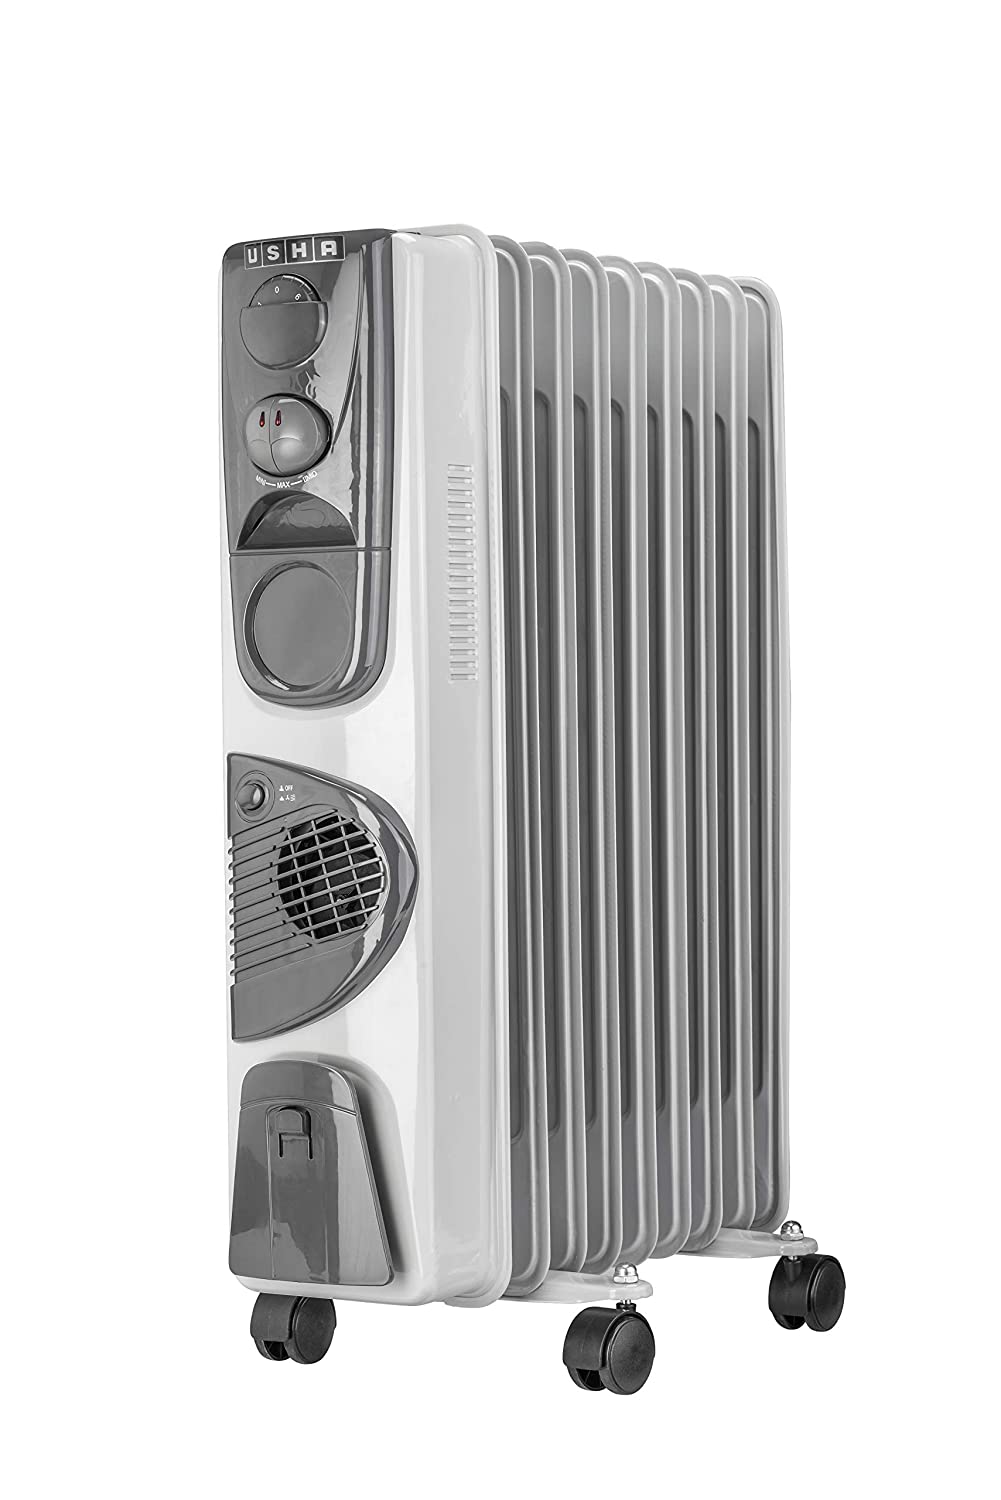 Amazon Offer: Know why oil heaters are best for home, buy this heater at up to 50% off on Amazon